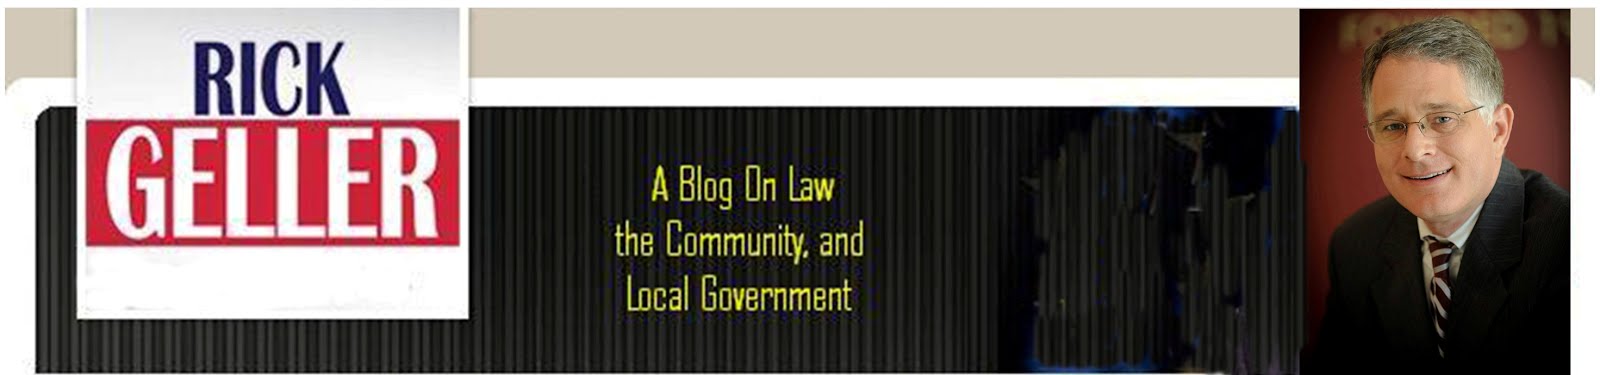 Rick Geller on Law and Local Government